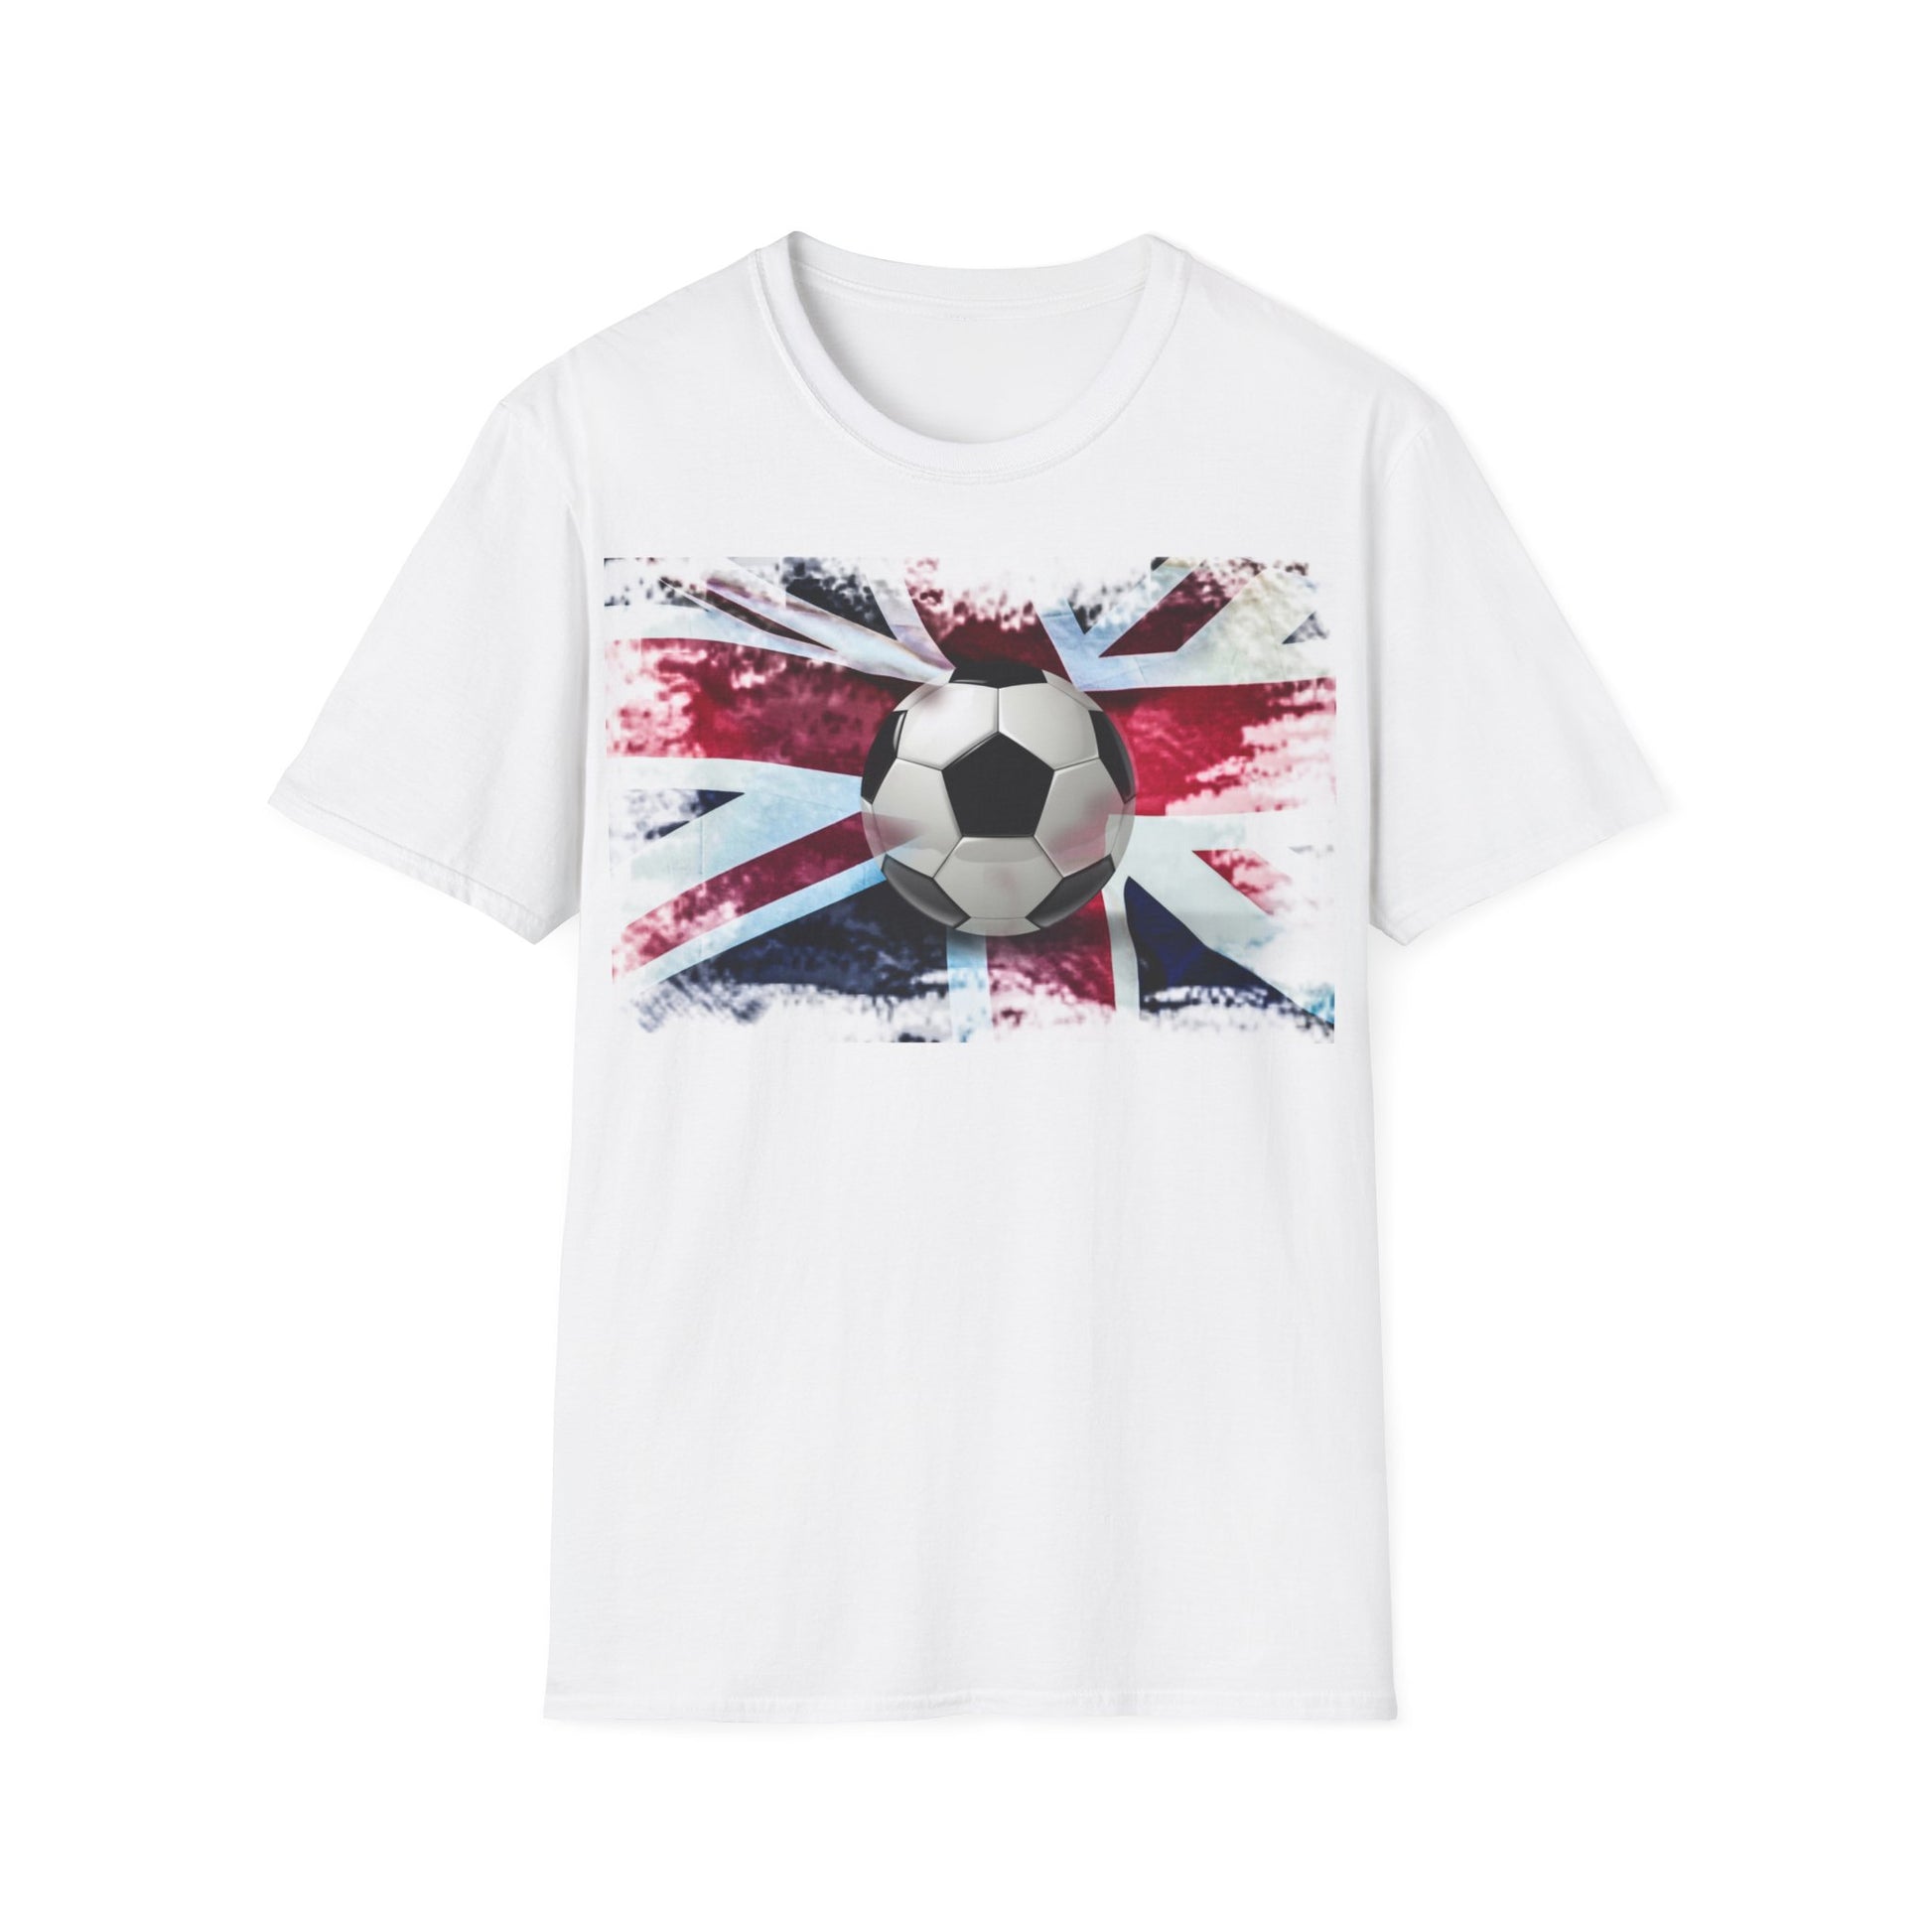 A white t-shirt with a distressed painting of the Union Jack Flag and a British football